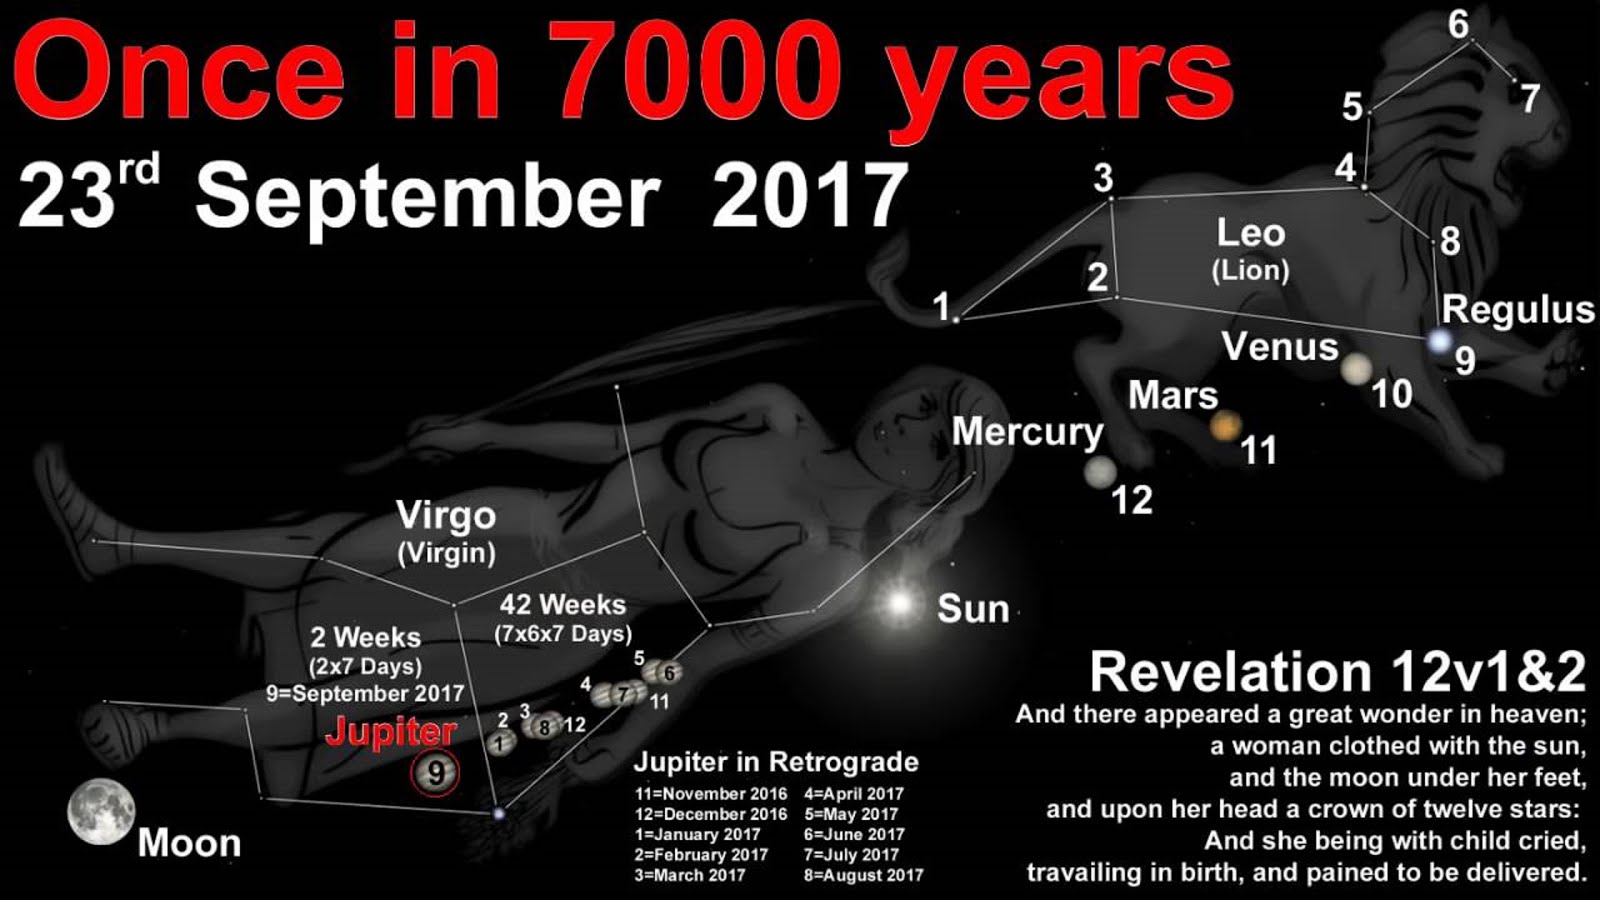 ONCE IN 7000 YEARS - 23rd SEPTEMBER 2017